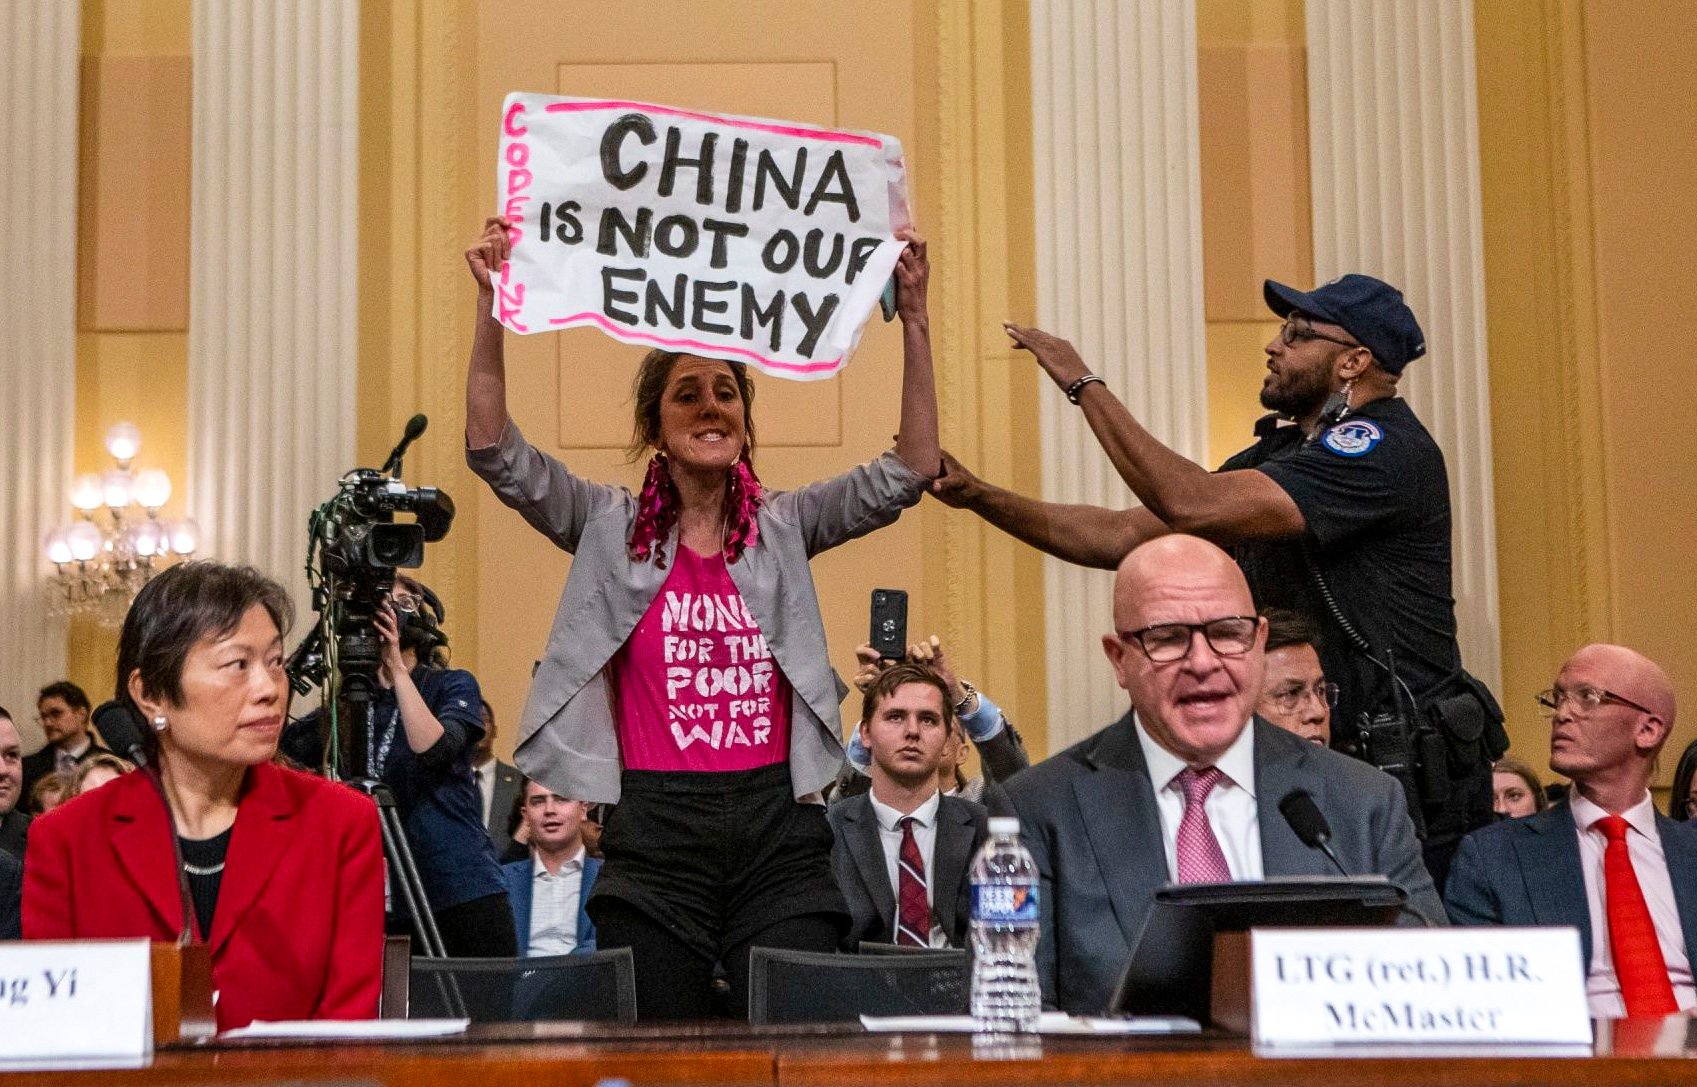 A demonstrator interrupts witness testimony during a hearing of the House Select Committee on the Strategic Competition Between the United States and the Chinese Communist Party, in Washington on February 28. Photo: Bloomberg